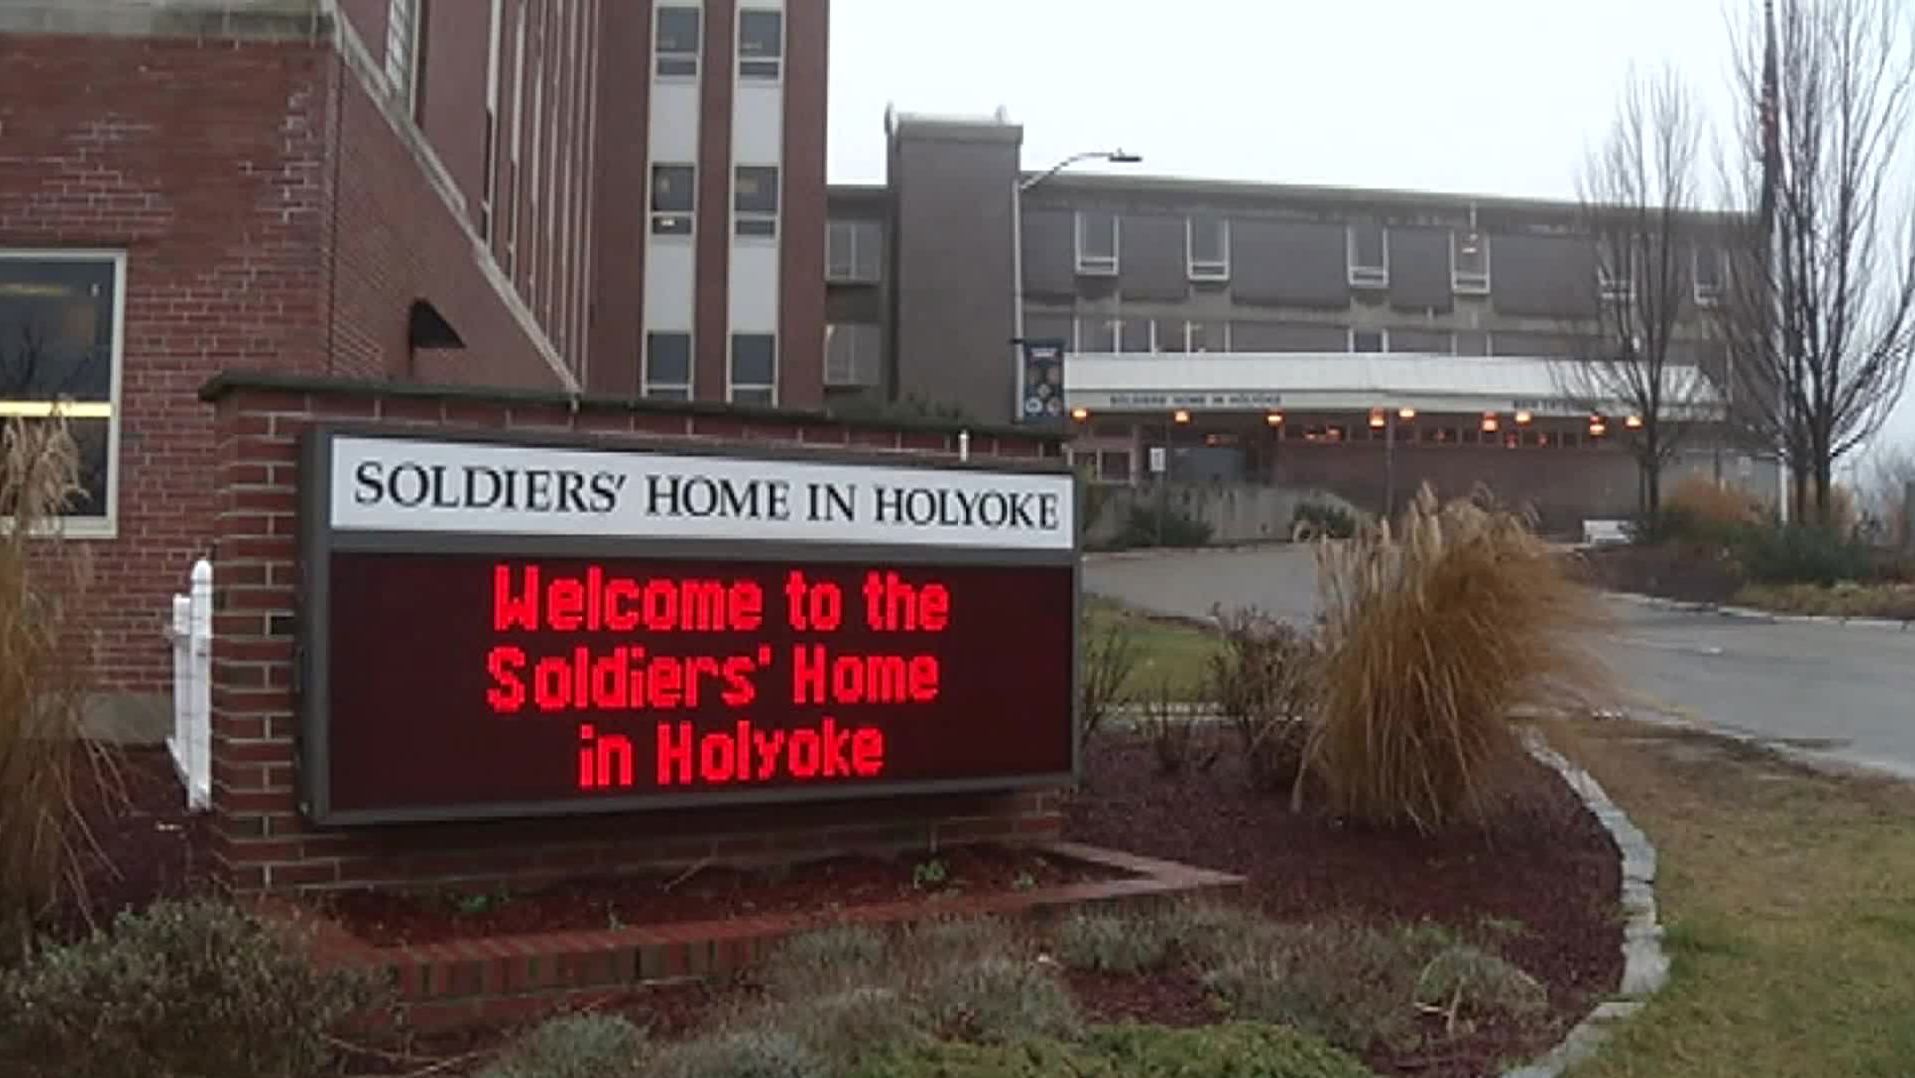 At least 28 residents of the Soldiers' Home in Holyoke Massachusetts, have died of coronavirus.